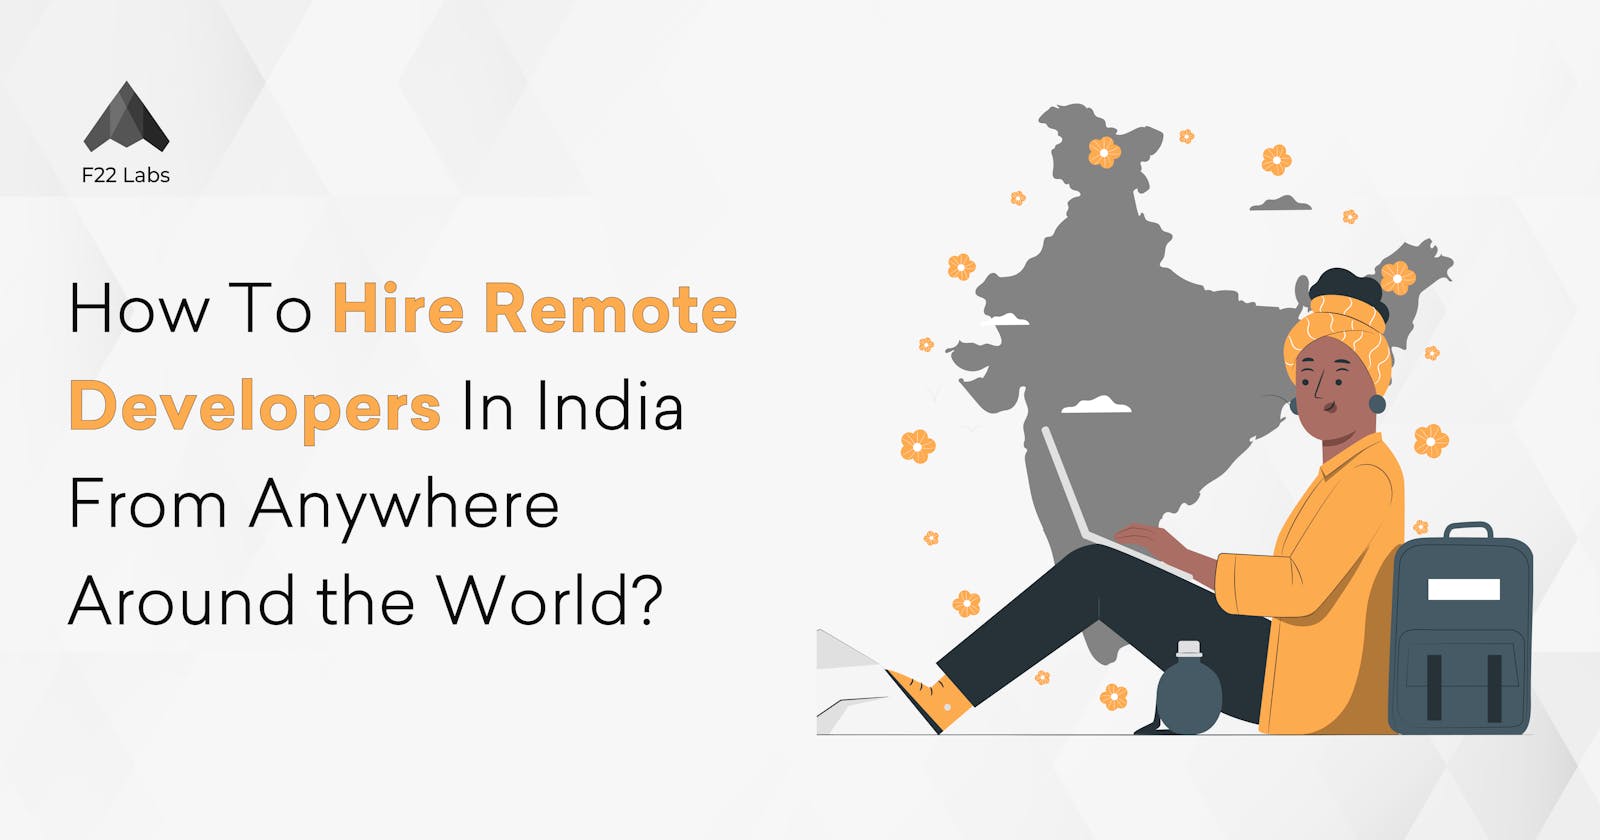 How To Hire Remote Developers In India From Anywhere Around the World?